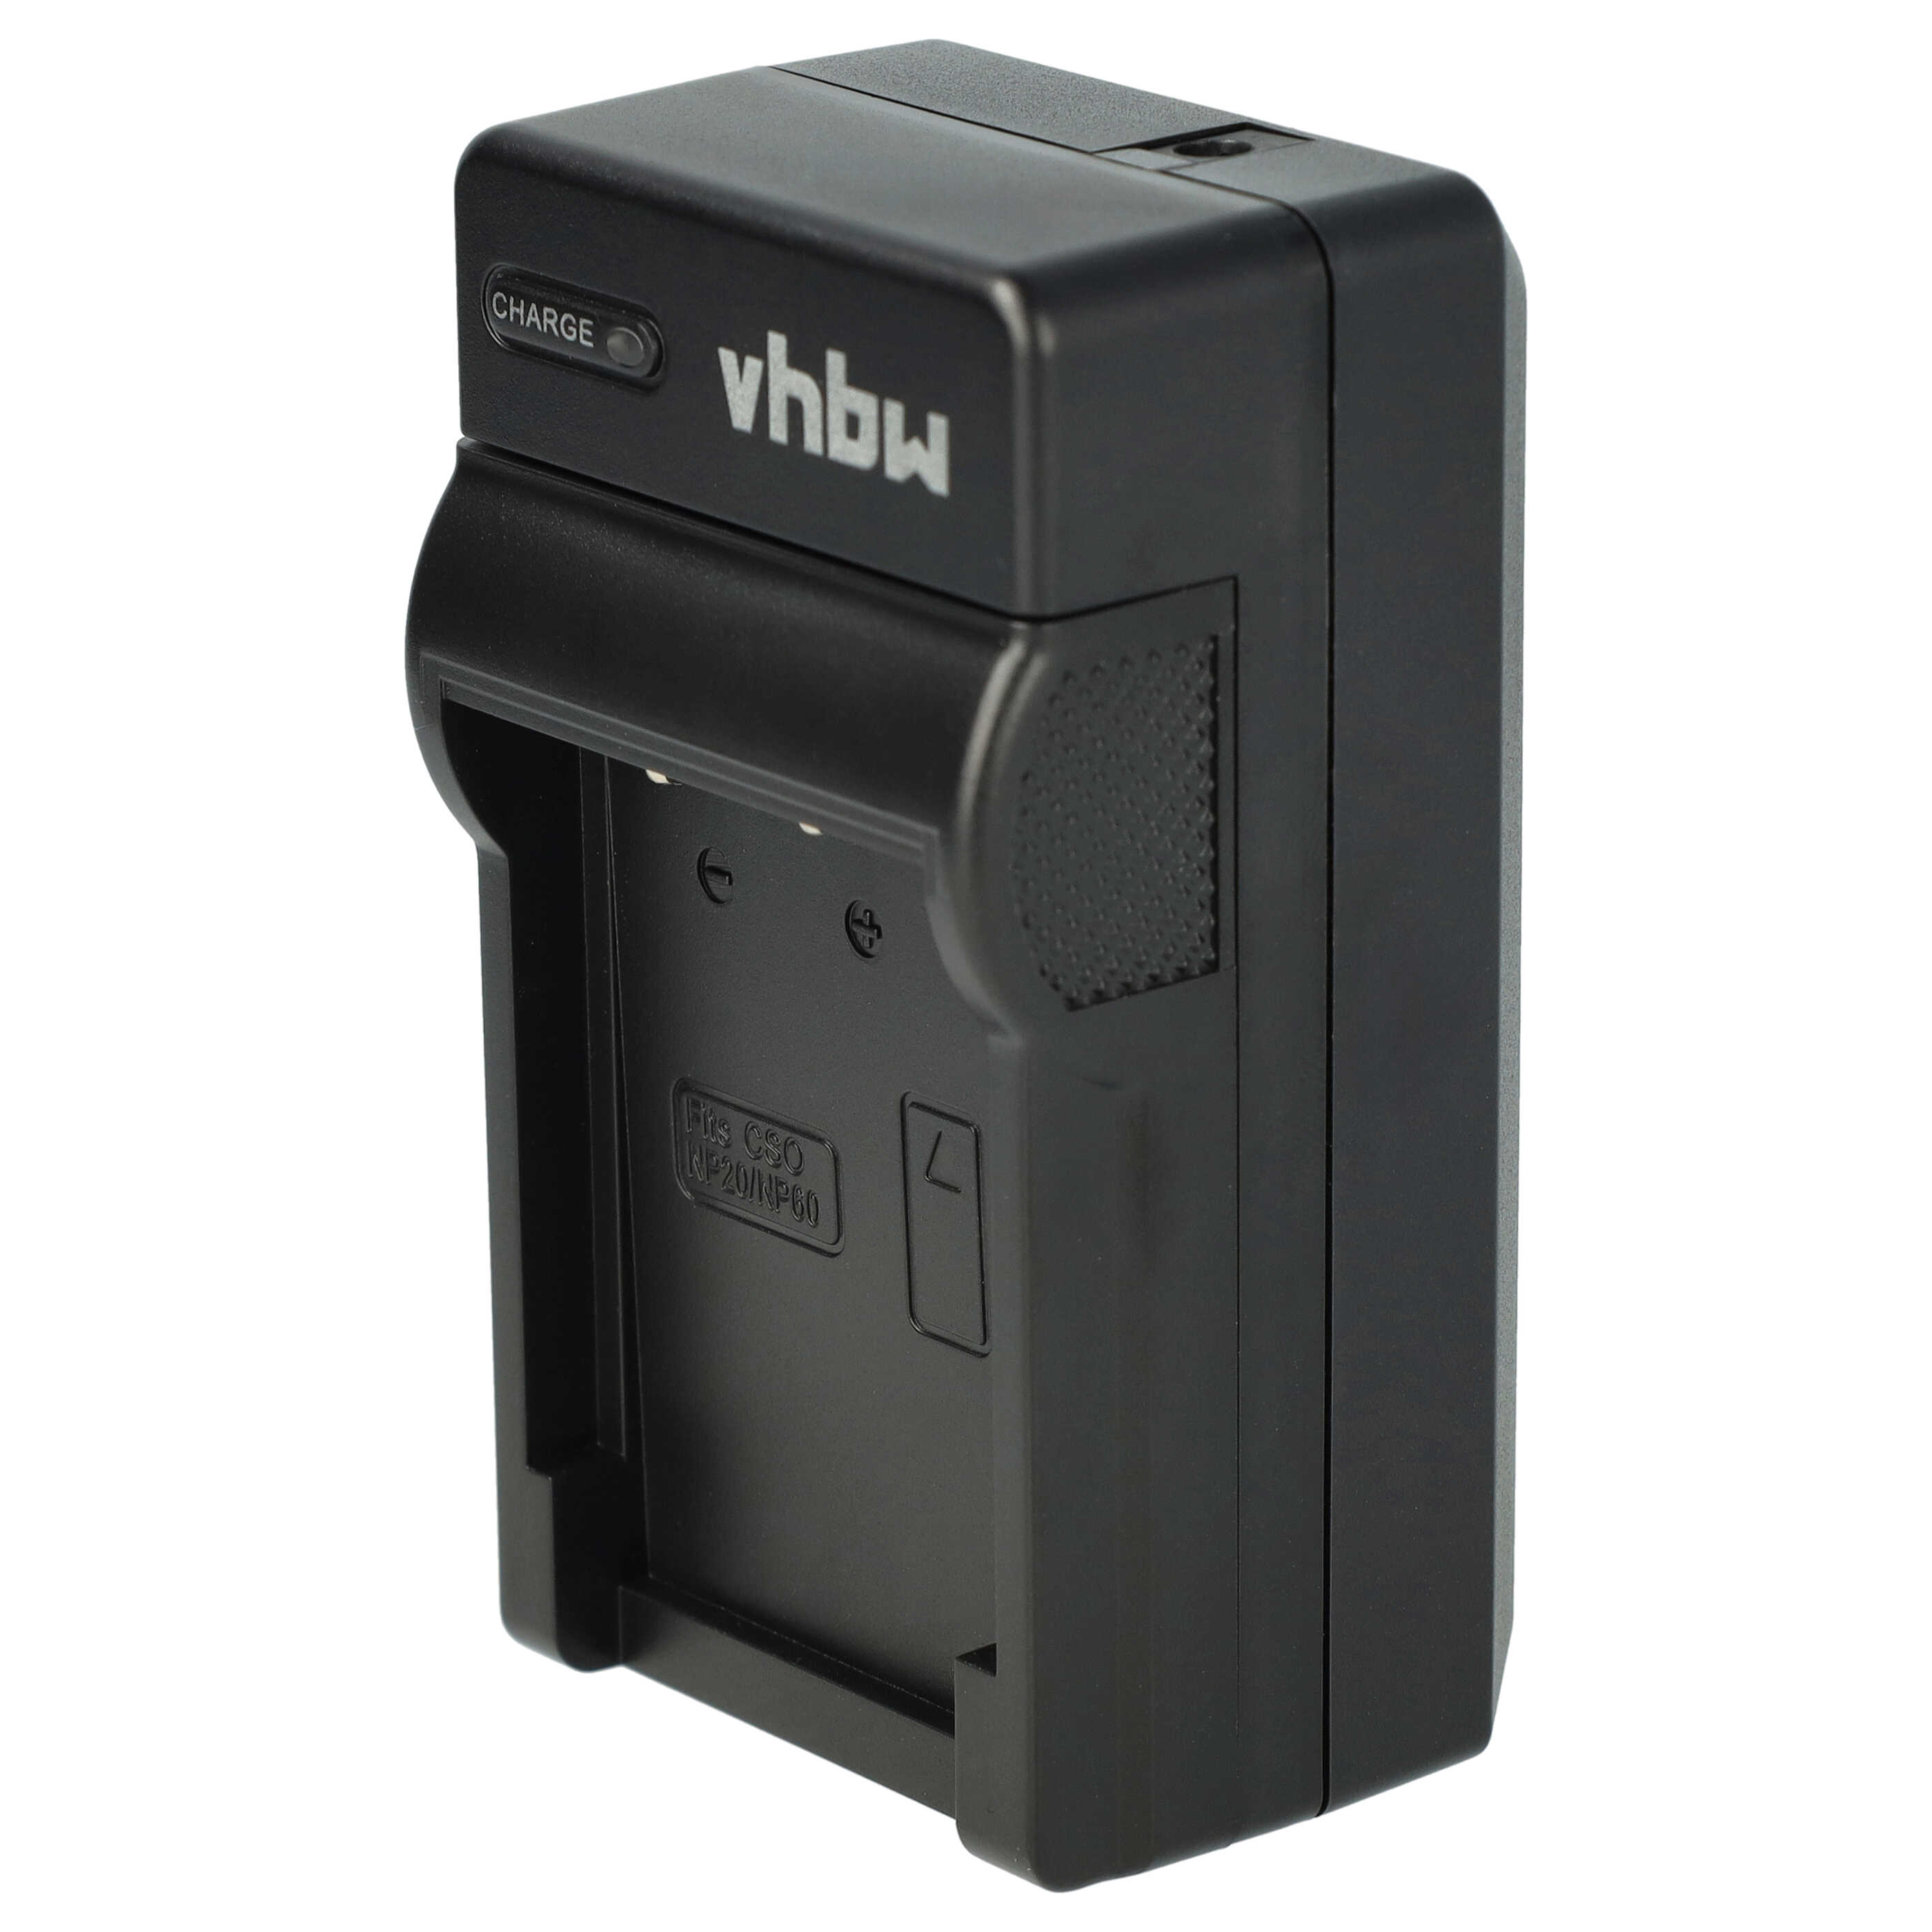 Battery Charger suitable for aquapix W510 Camera etc. - 0.6 A, 4.2 V